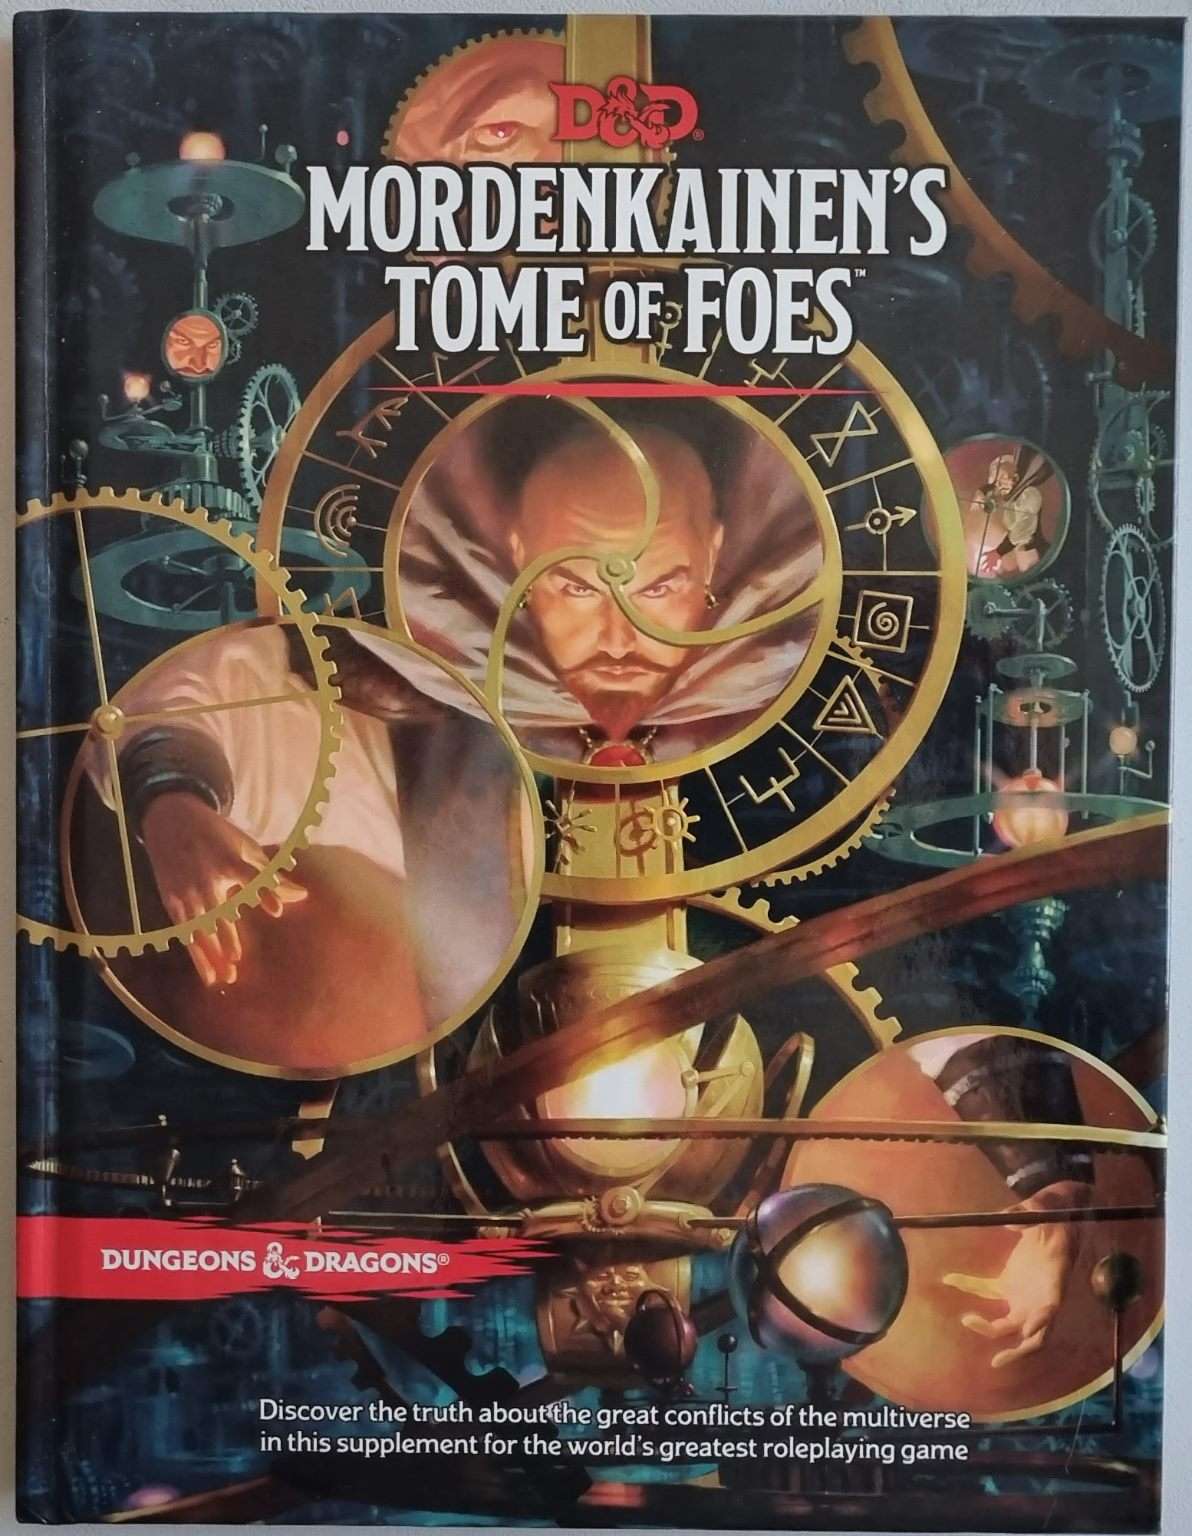 Dungeons and Dragons - Mordenkainen's Tome of Foes (5e)